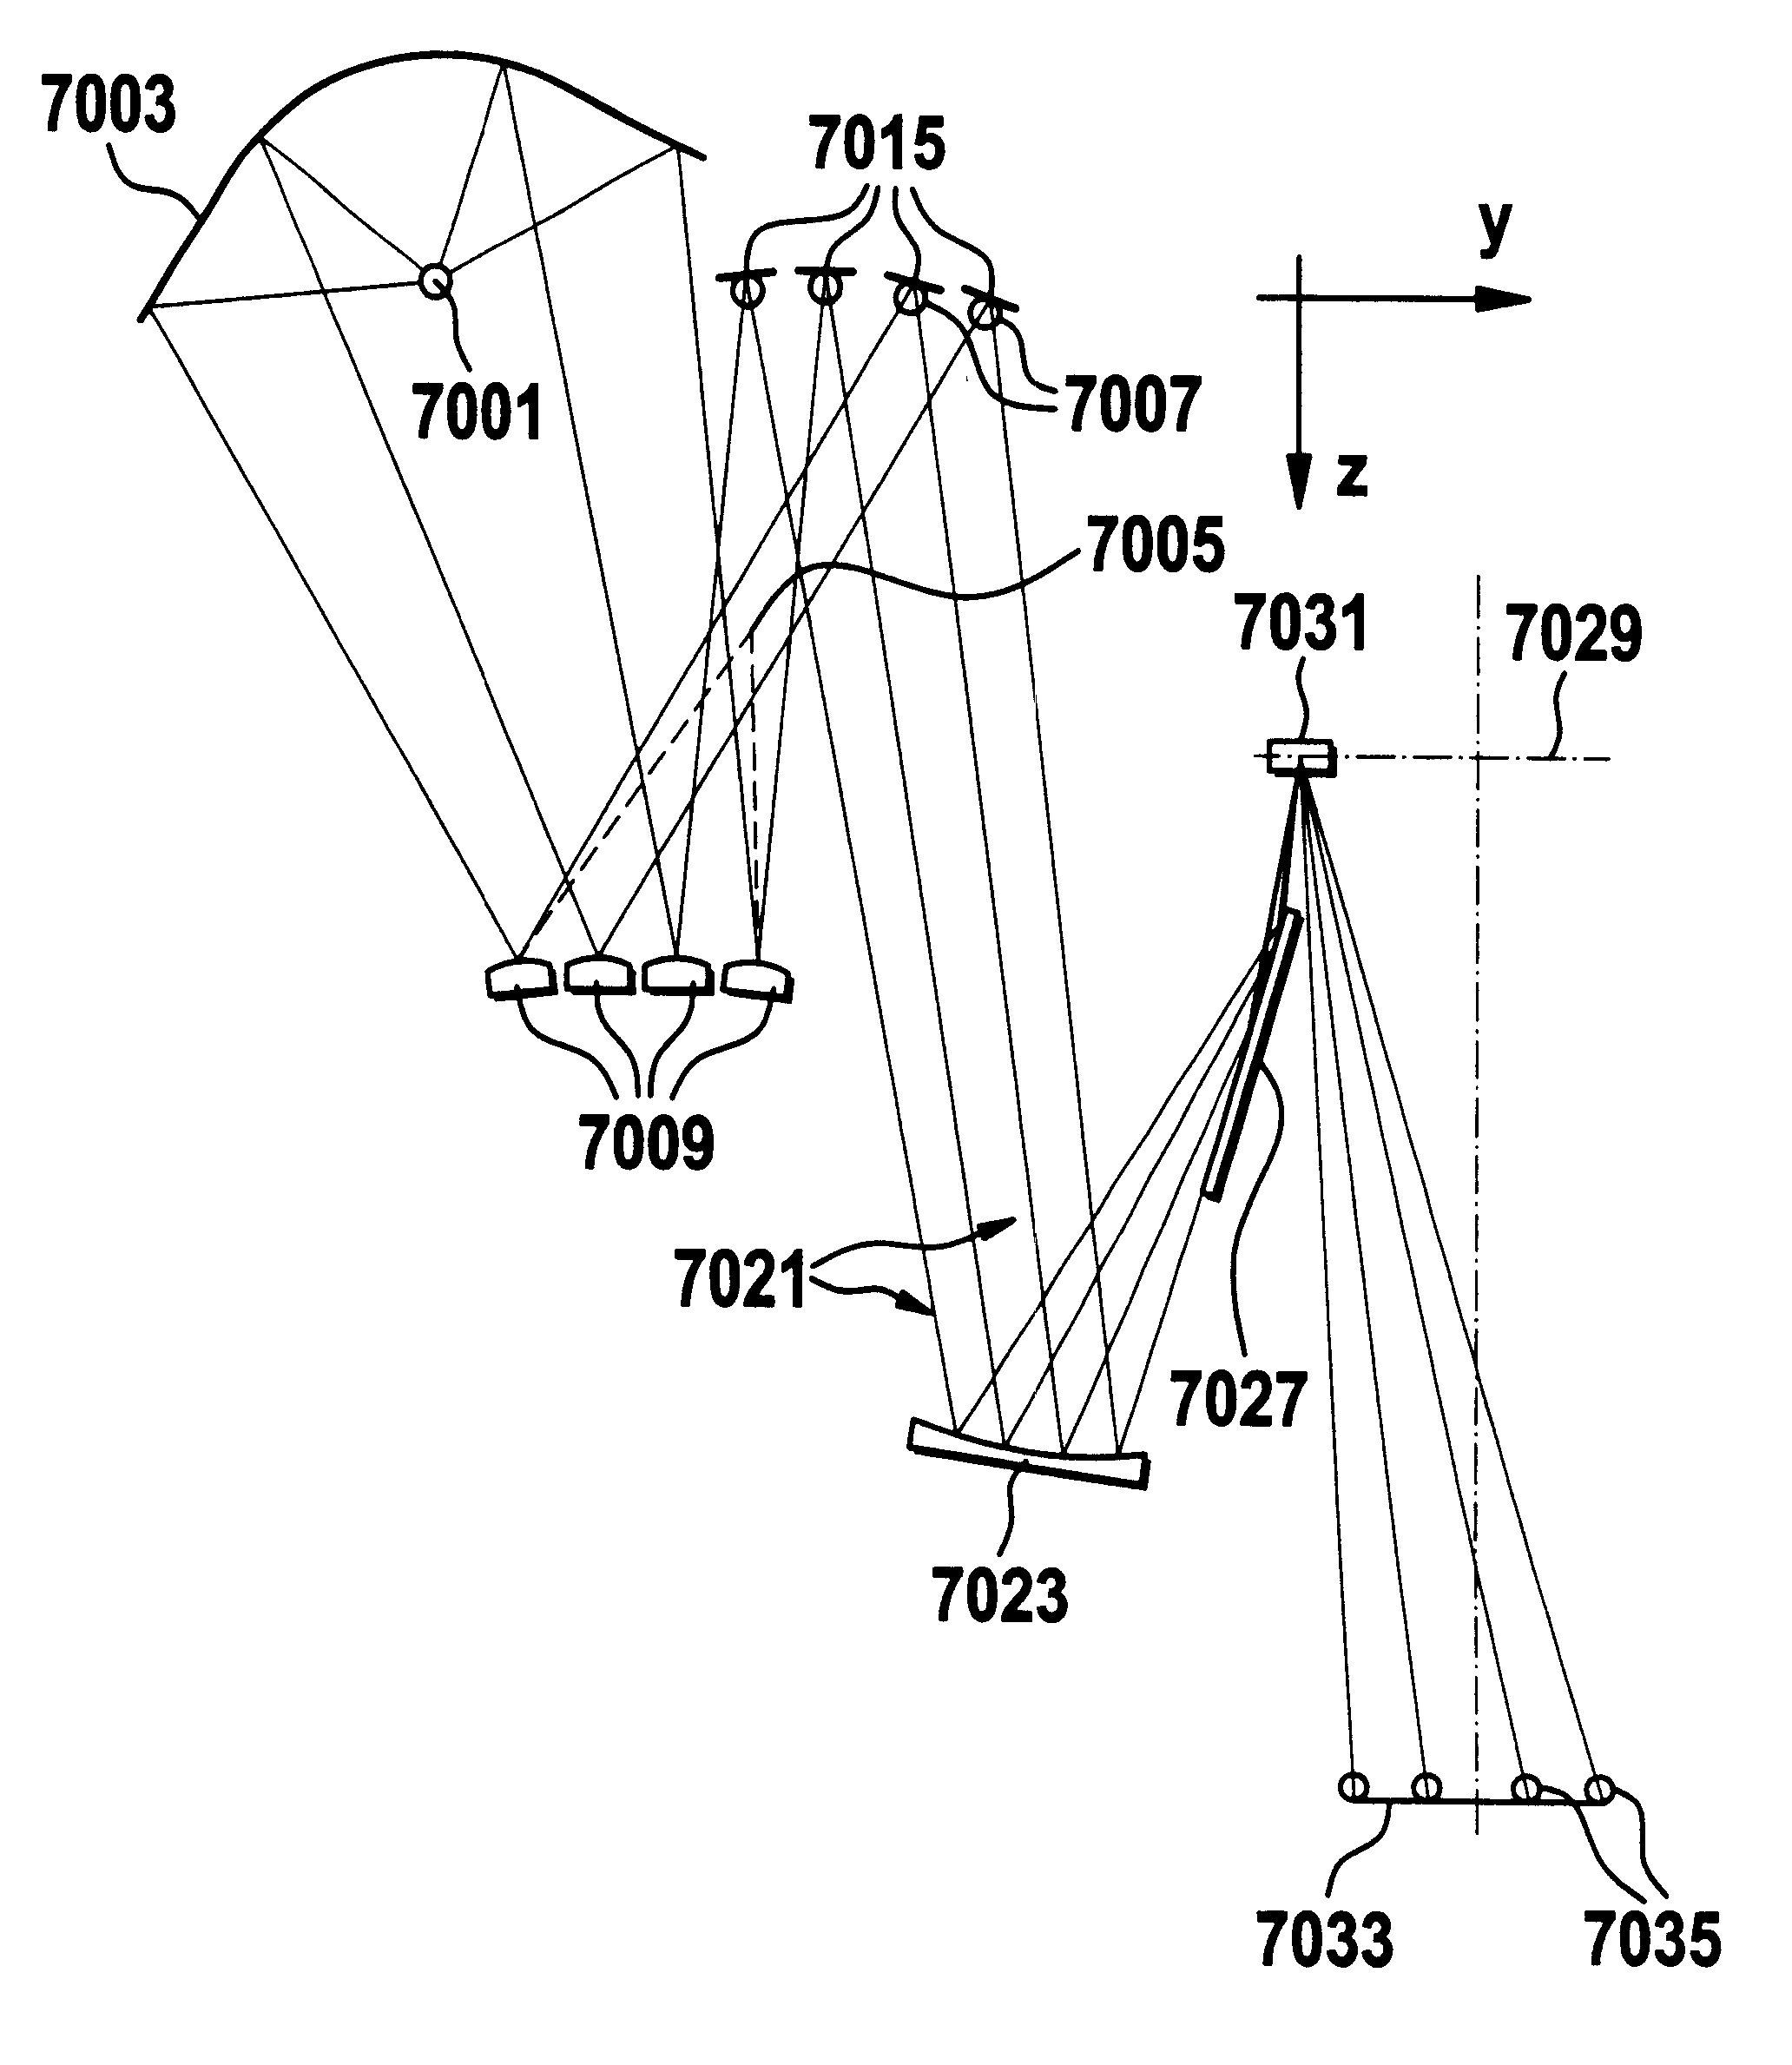 Illumination system particularly for microlithography